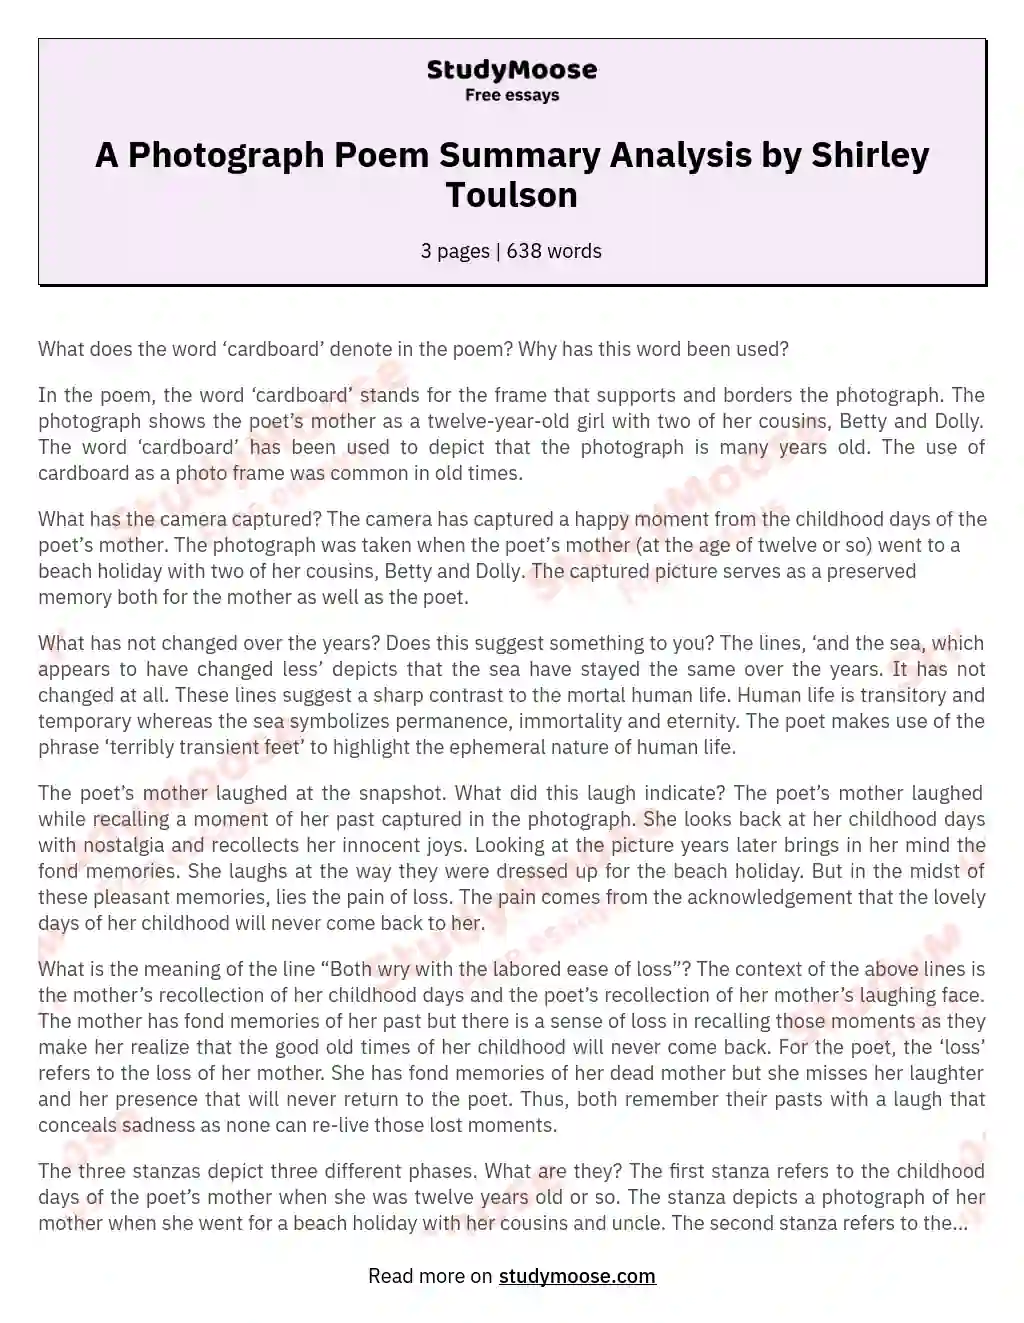 A Photograph Poem Summary Analysis by Shirley Toulson essay